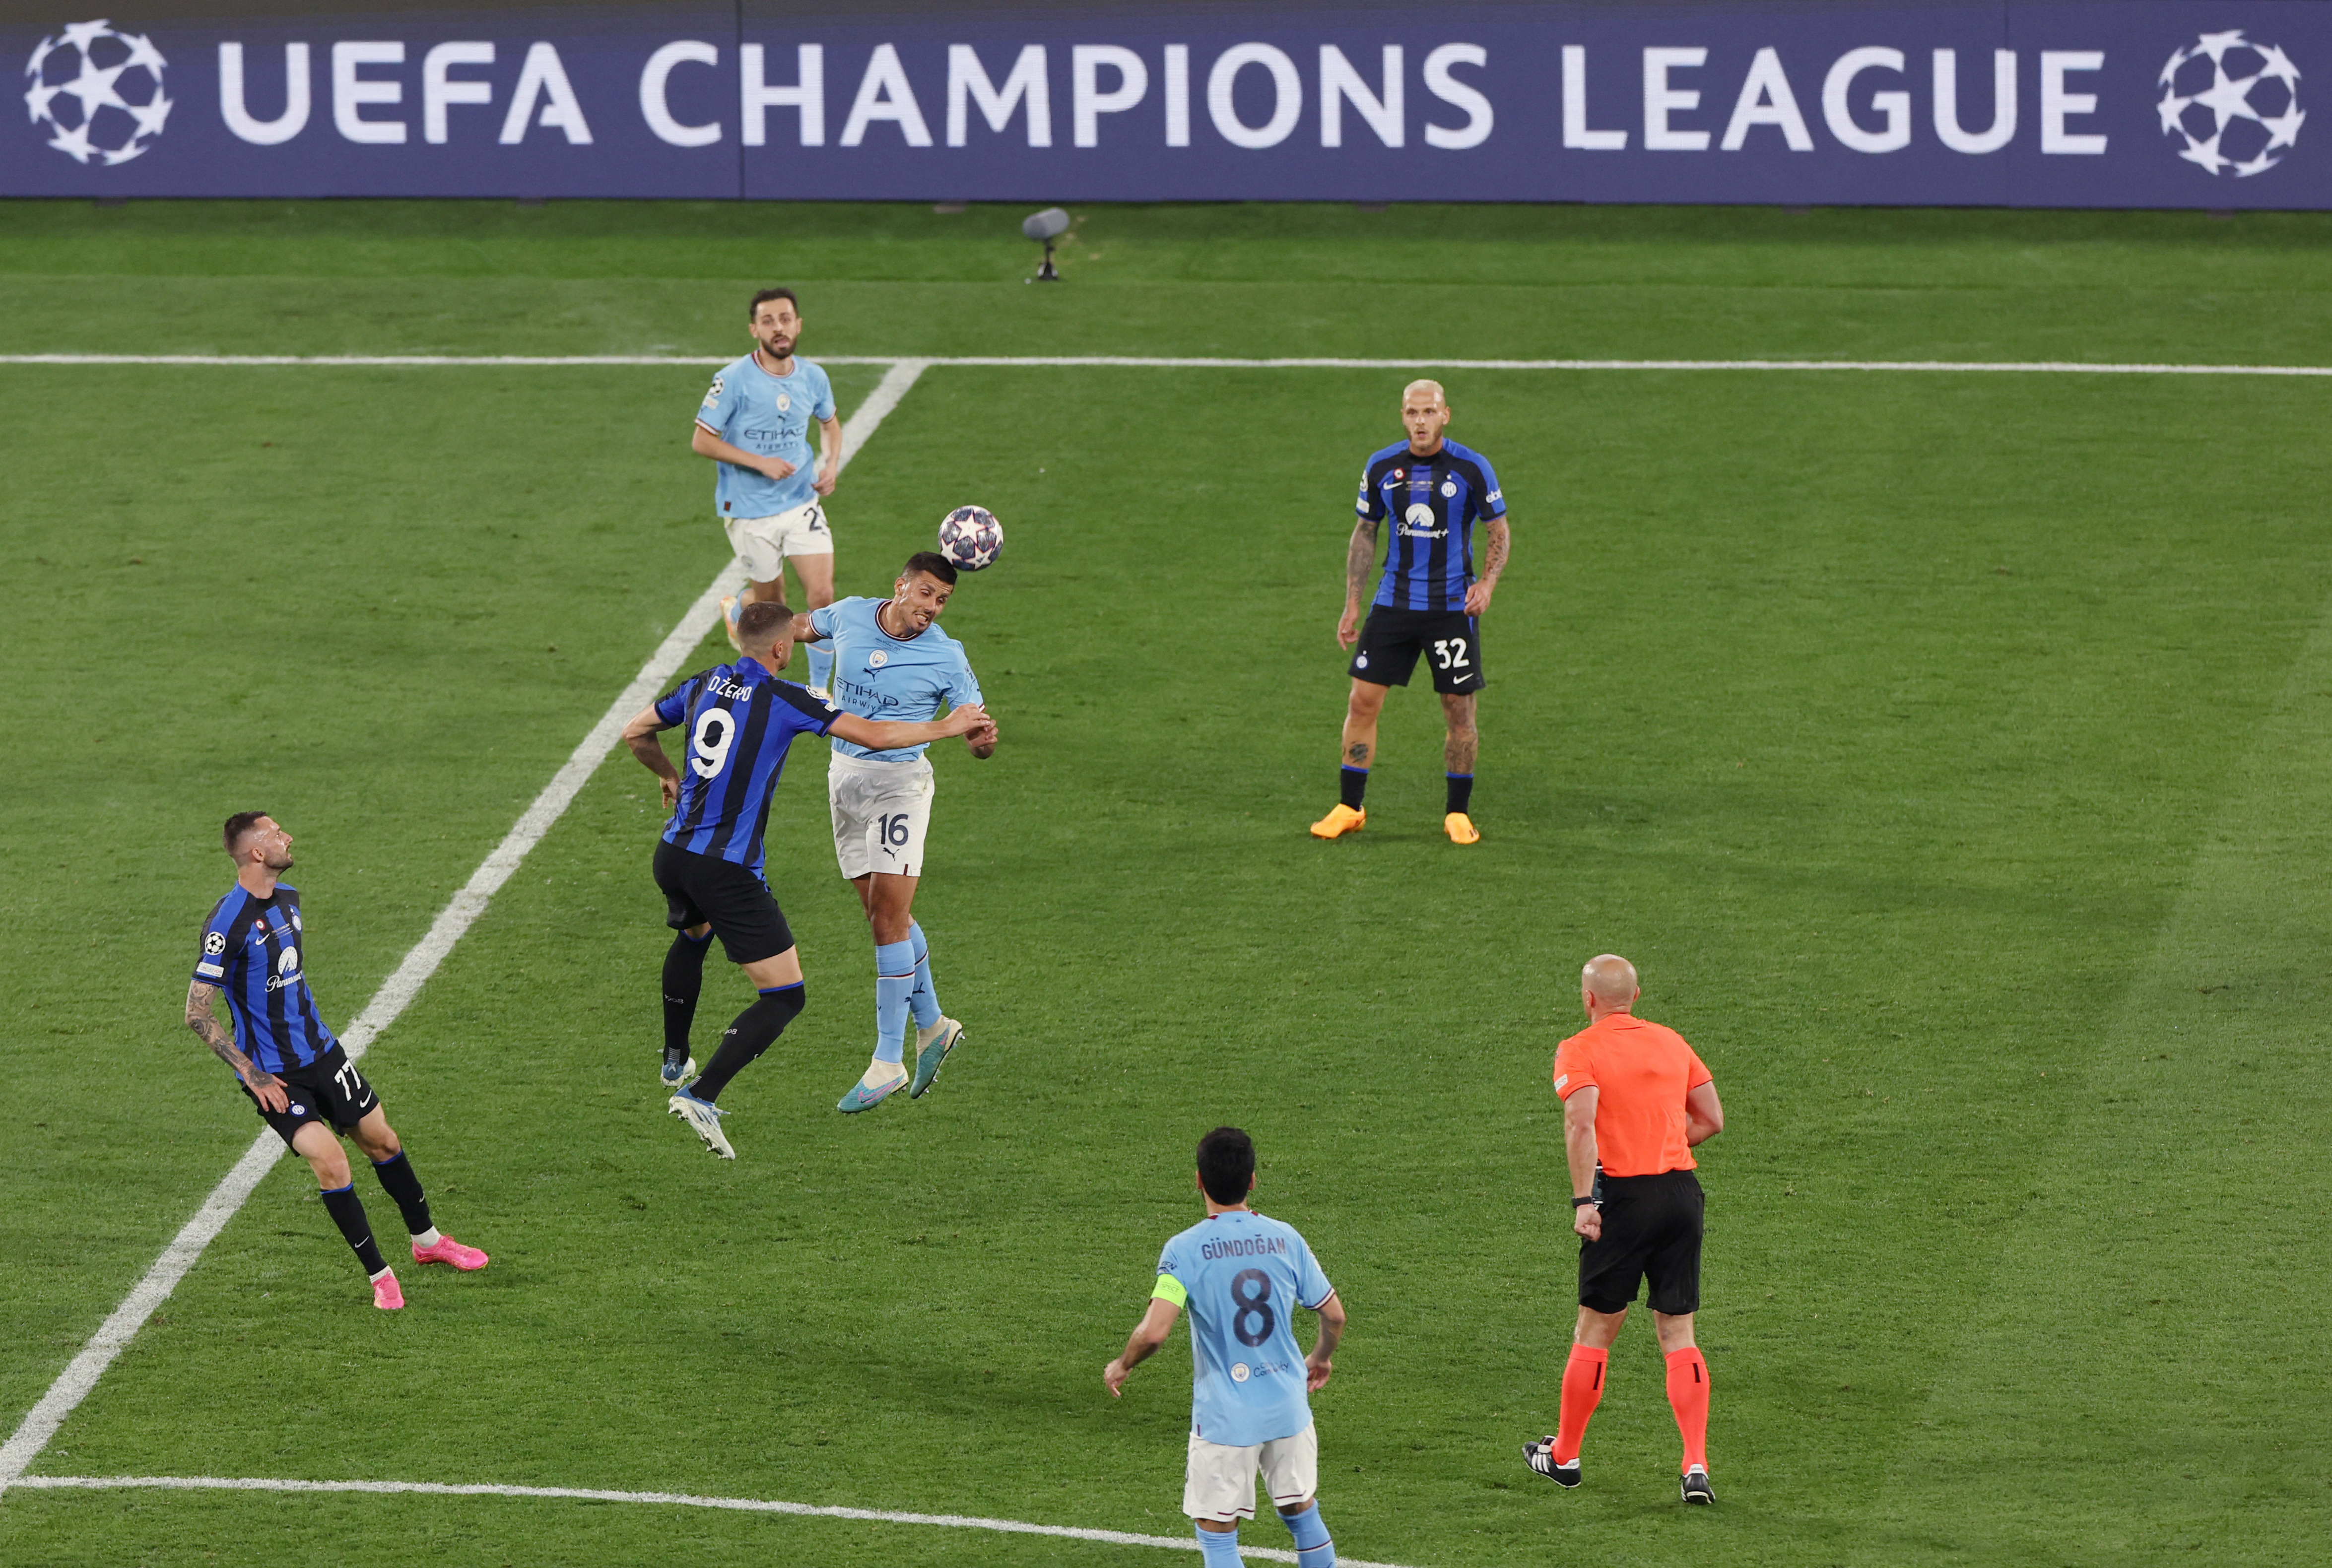 Manchester City beat Inter Milan in Champions League final